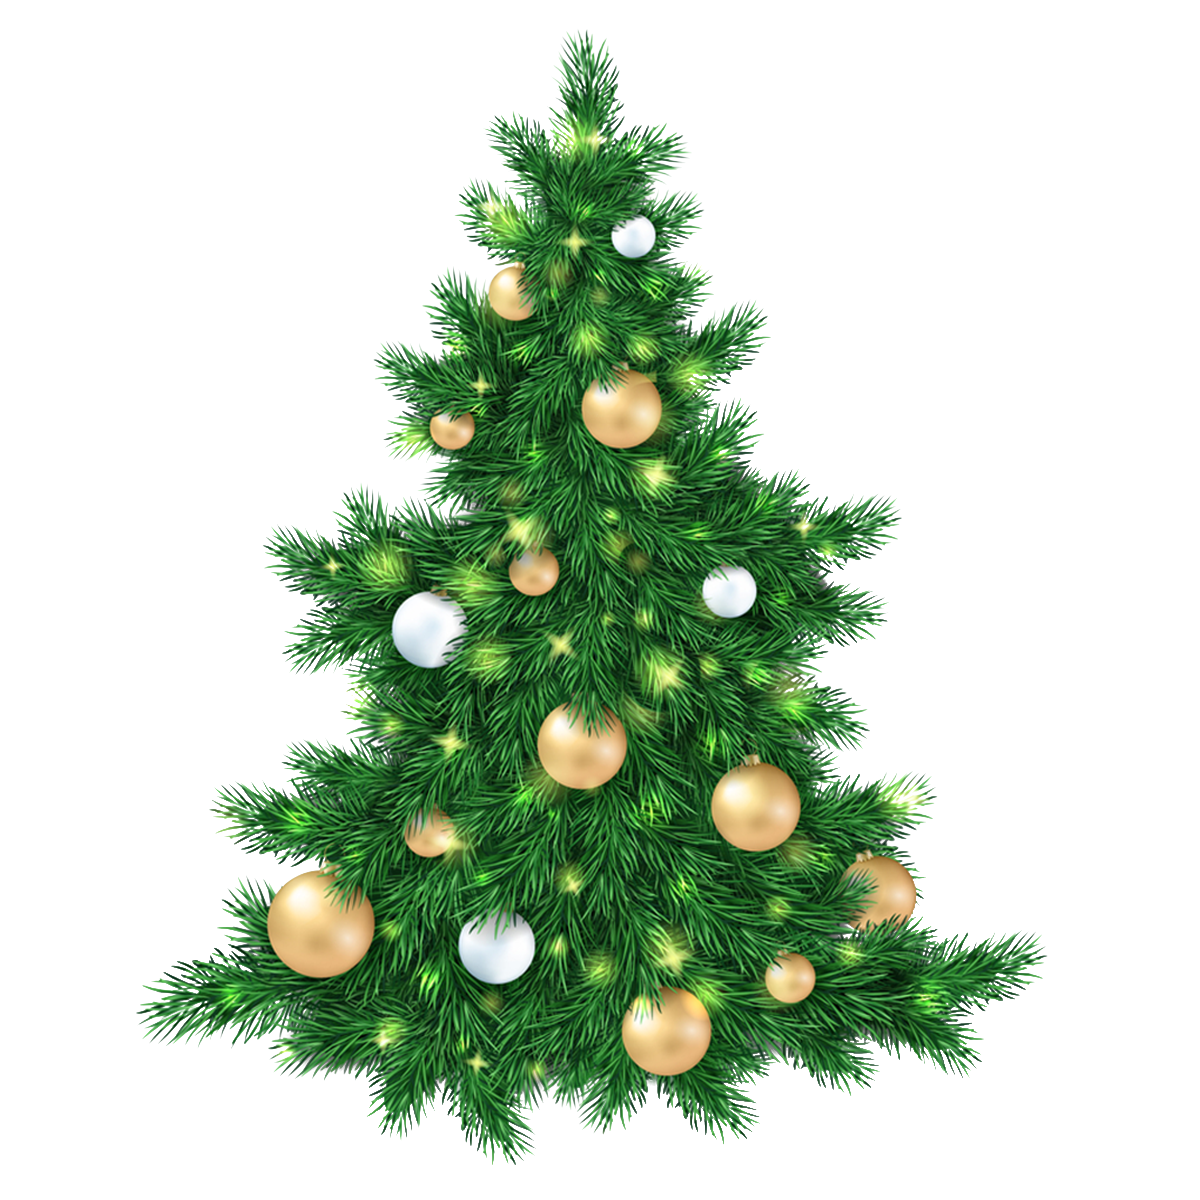 pngtreechristmas_tree_3732160.png